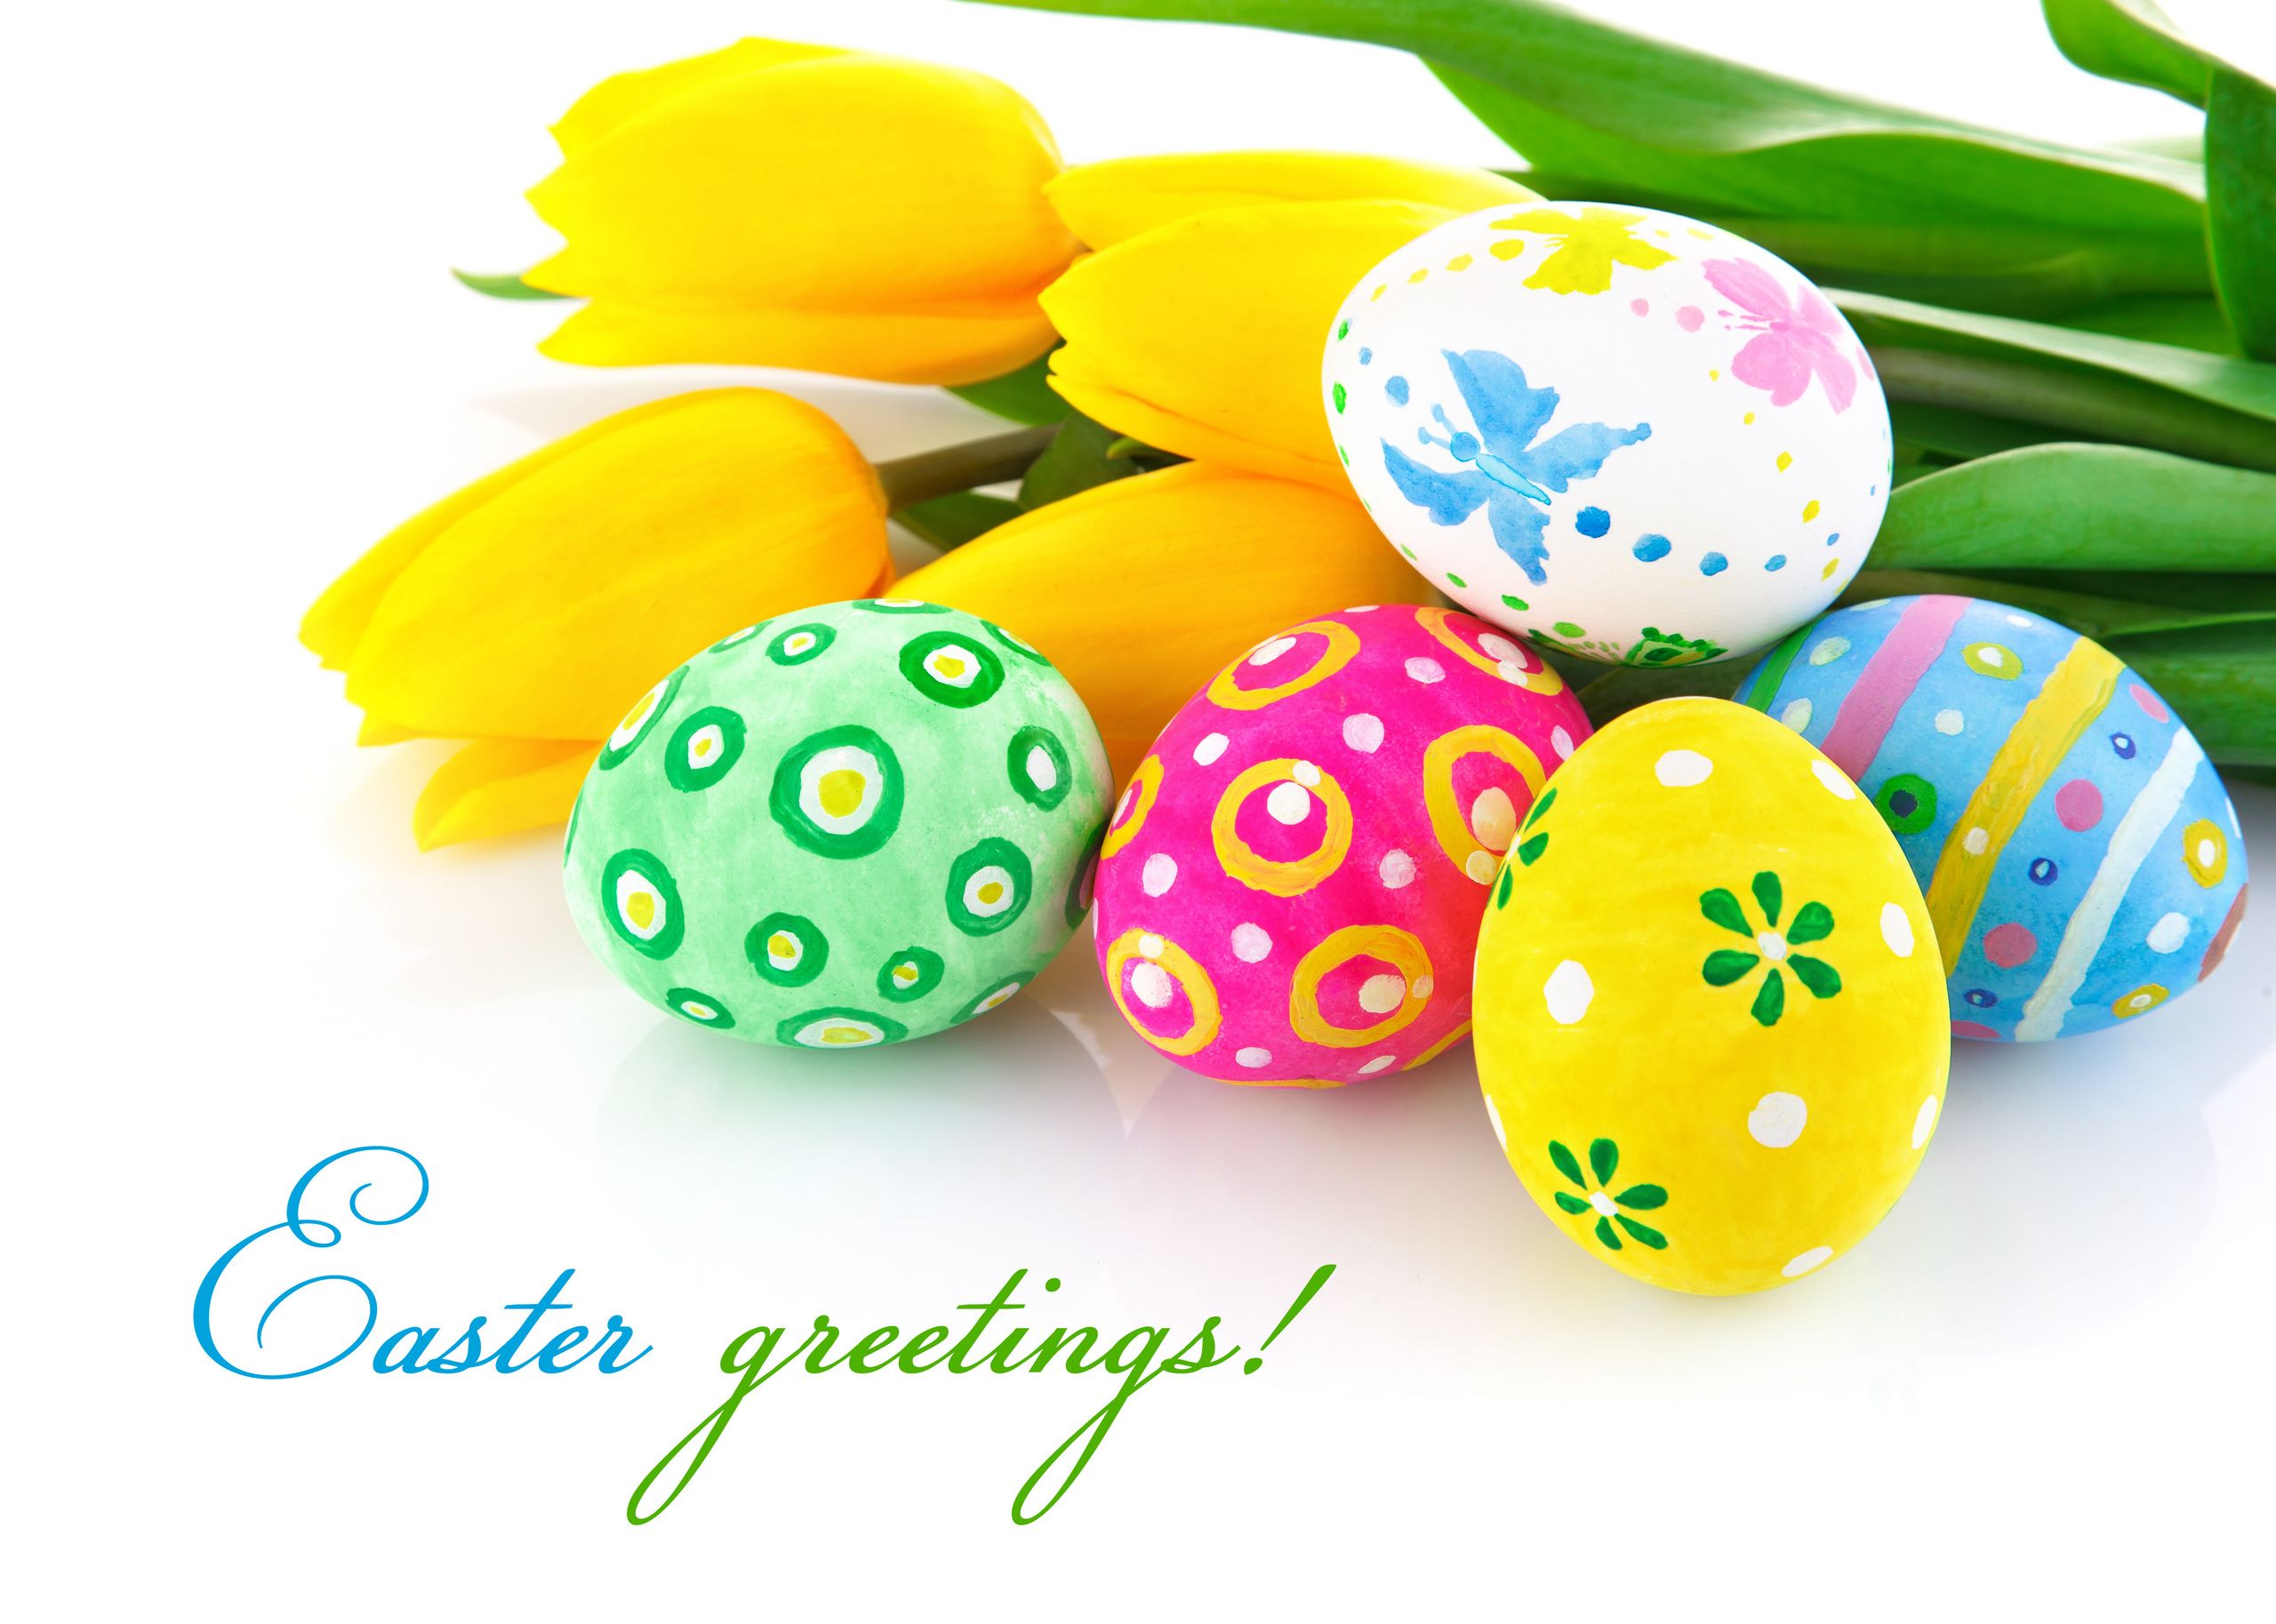 Easter Greetings Images